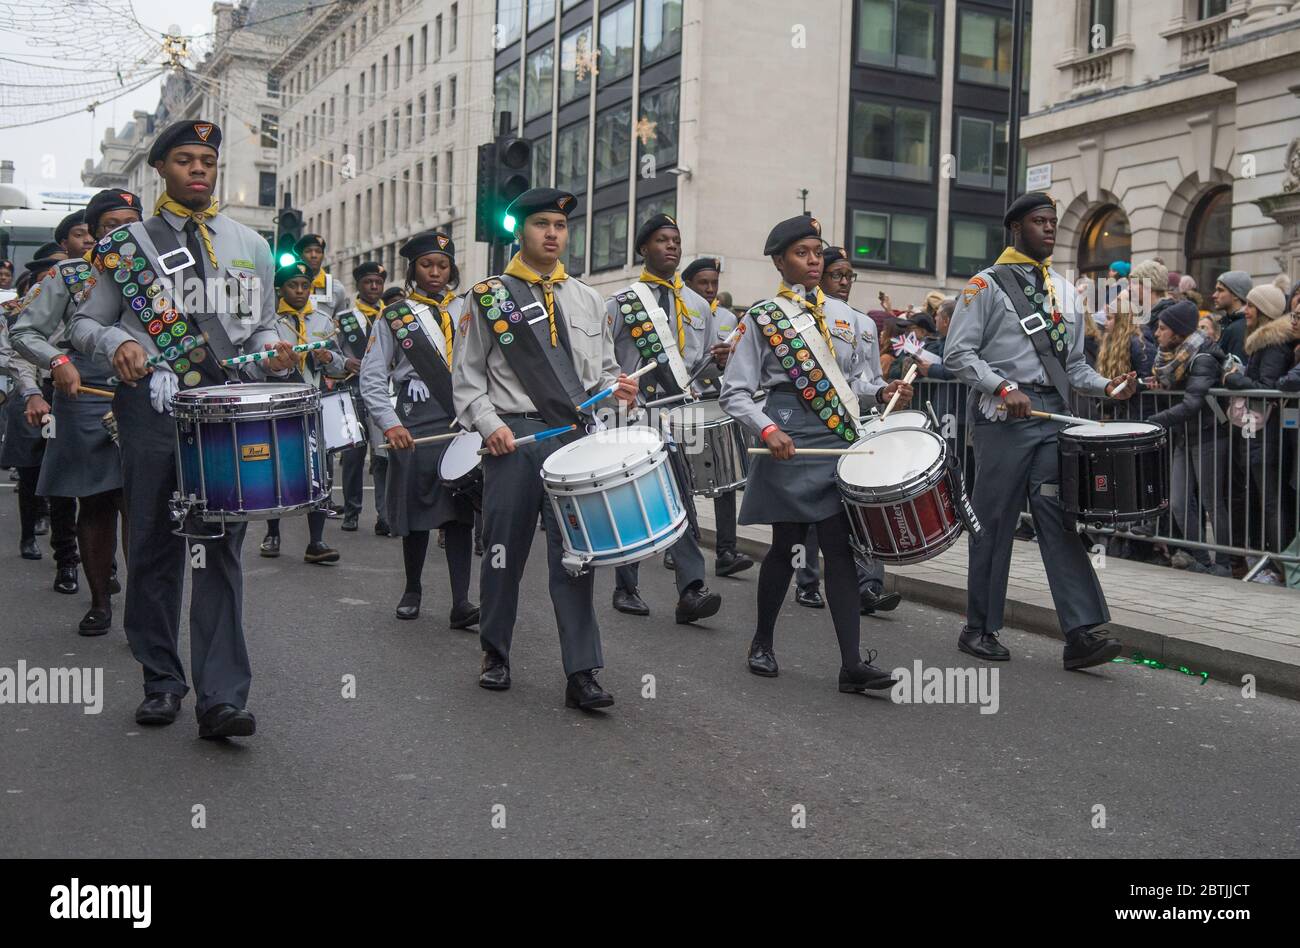 London New Year's Day Parade 2020, High School Marching Band of Drummers. Stock Photo